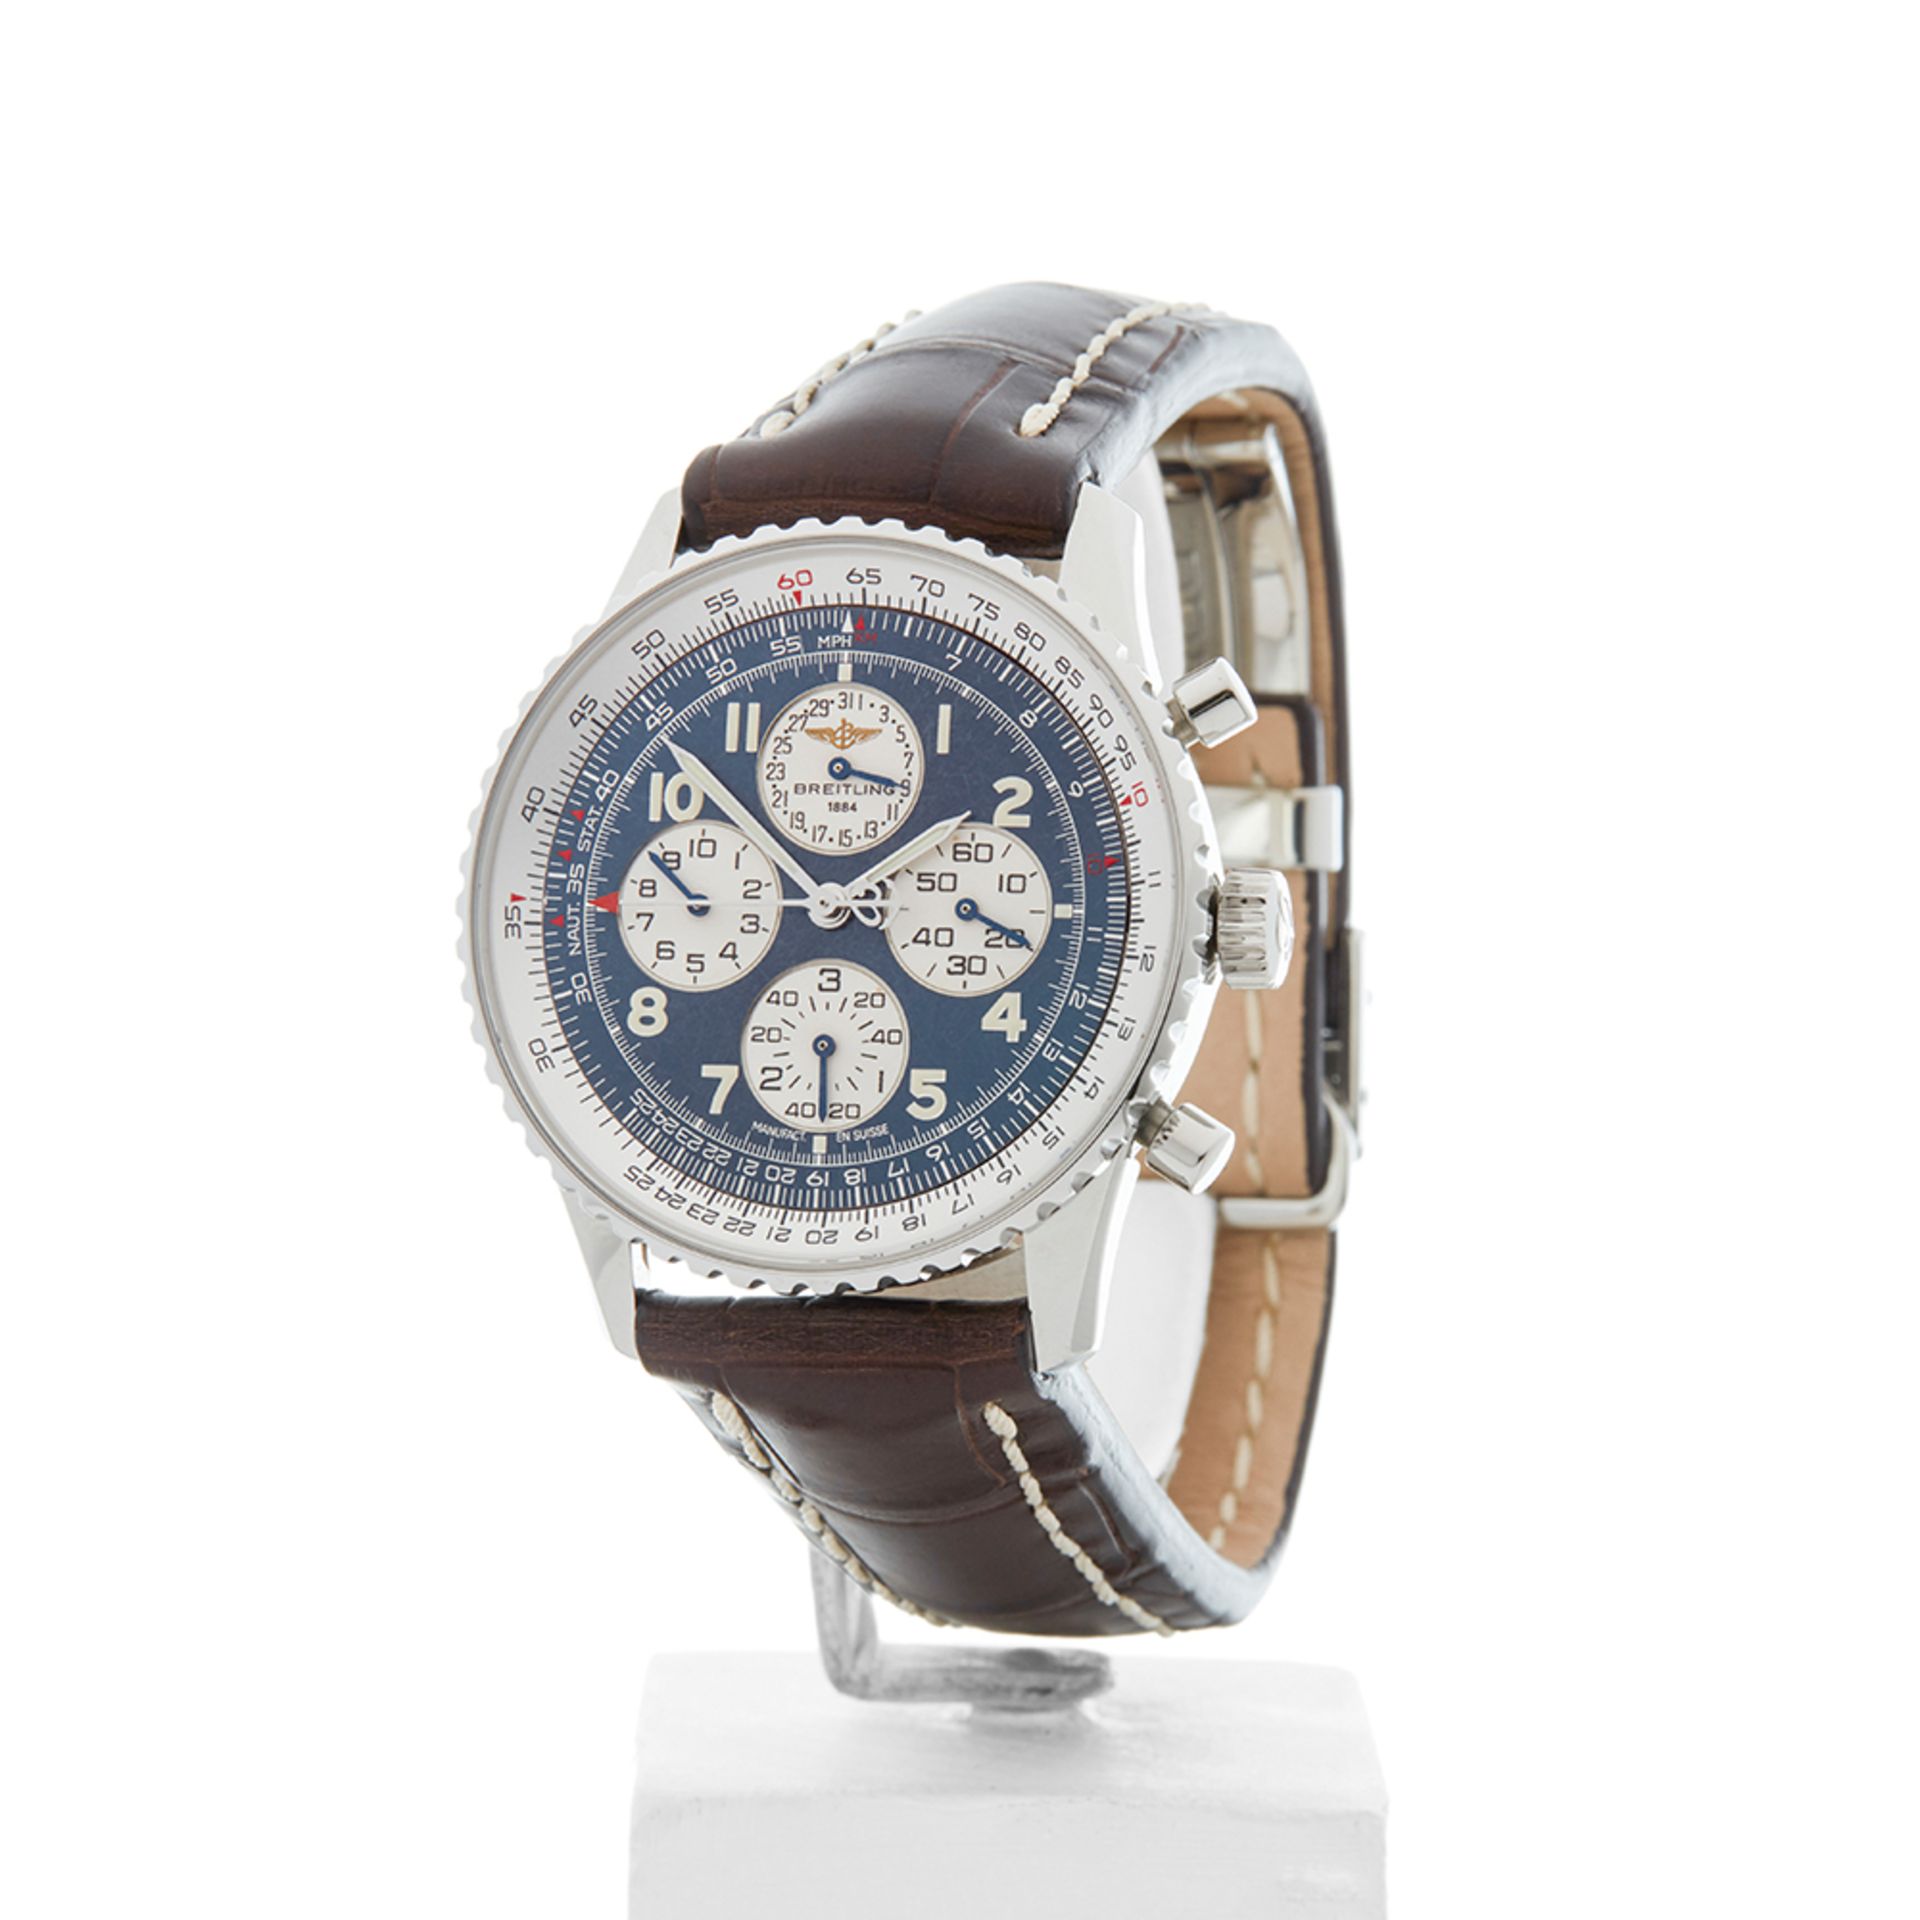 Breitling Navitimer Chronograph 38mm Stainless Steel - A33030 - Image 3 of 9